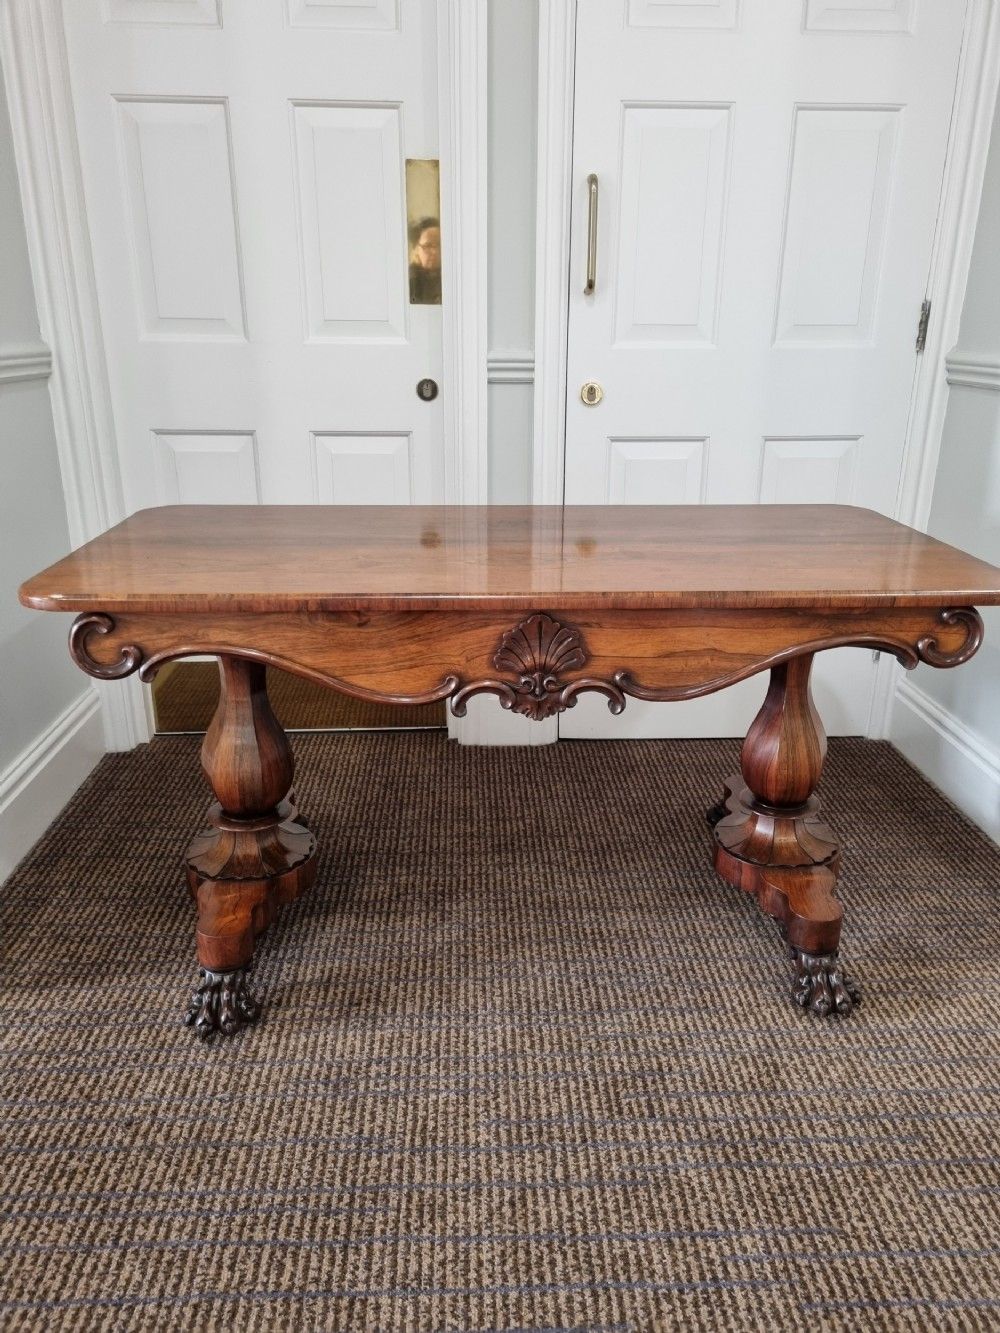 Unusual 19Thc Freestanding Rosewood Table With Drawers | 1027796 |  Sellingantiques.co.uk Regarding Freestanding Tables With Drawers (Photo 12 of 15)